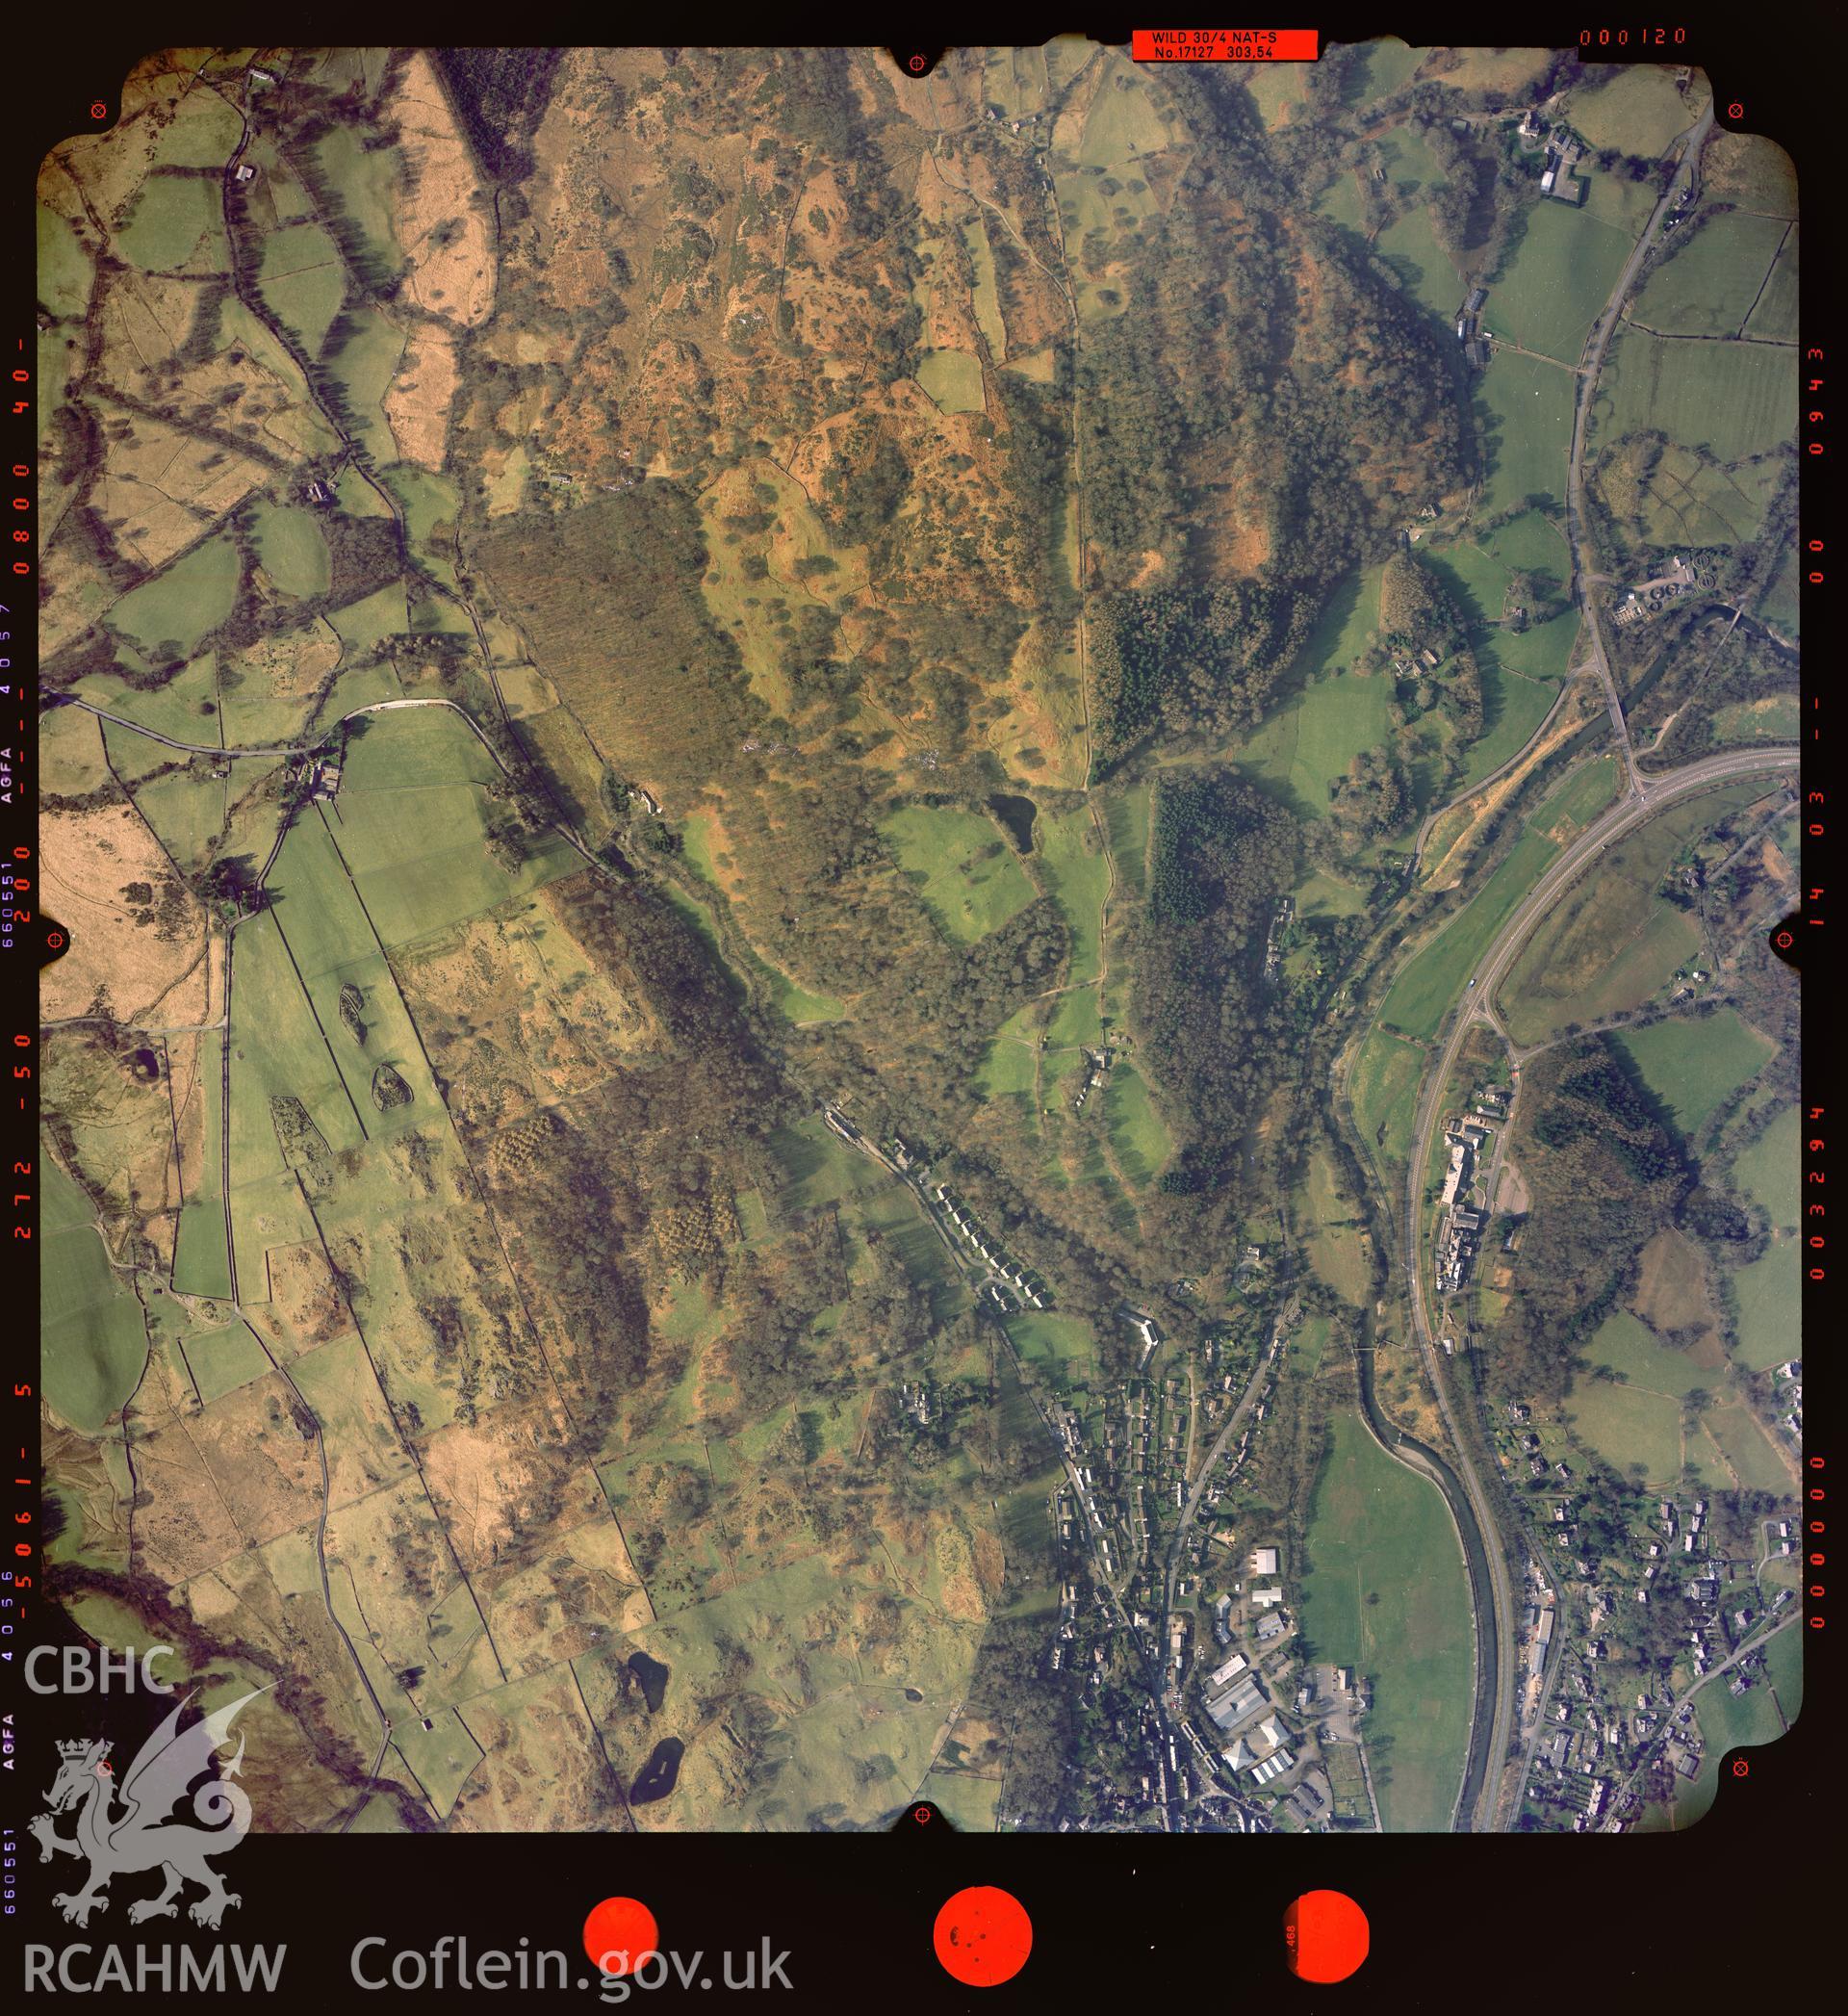 Digitized copy of a colour aerial photograph showing an area to the west of Dolgellau, taken by Ordnance Survey, 2003.